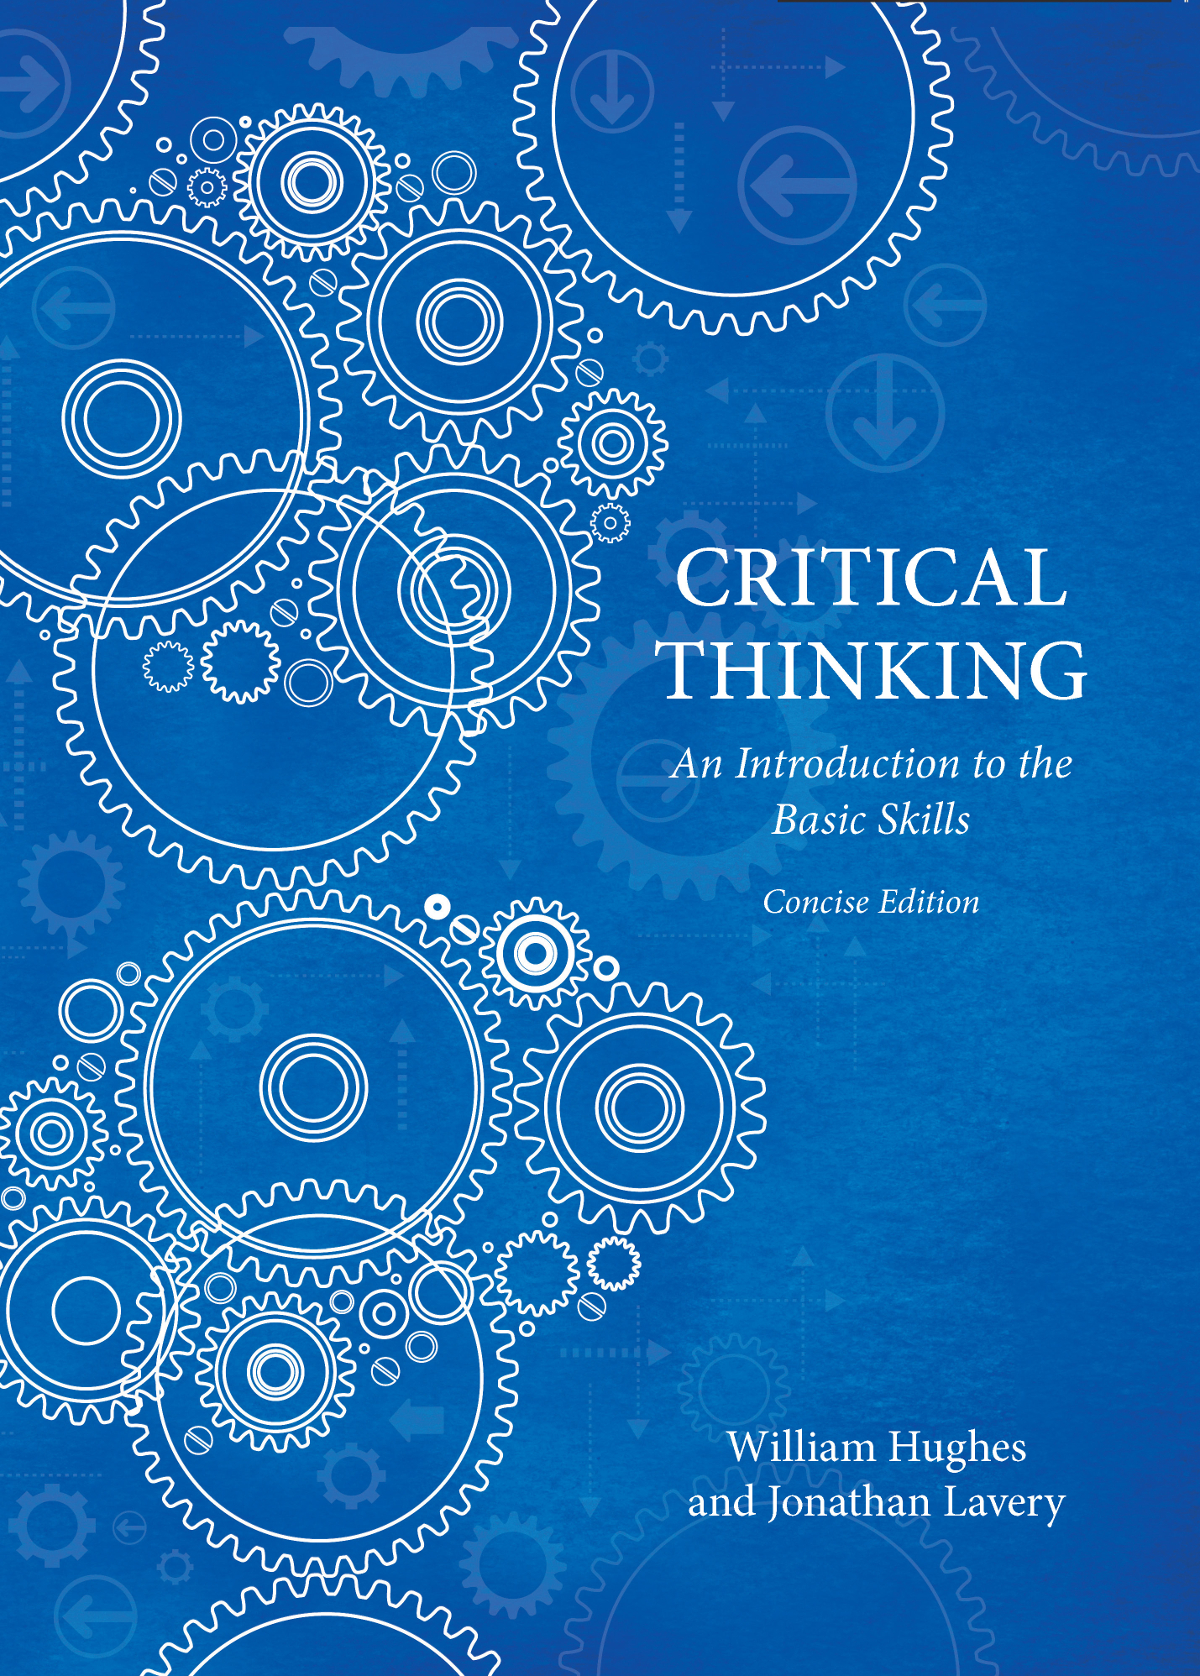 critical thinking article pdf